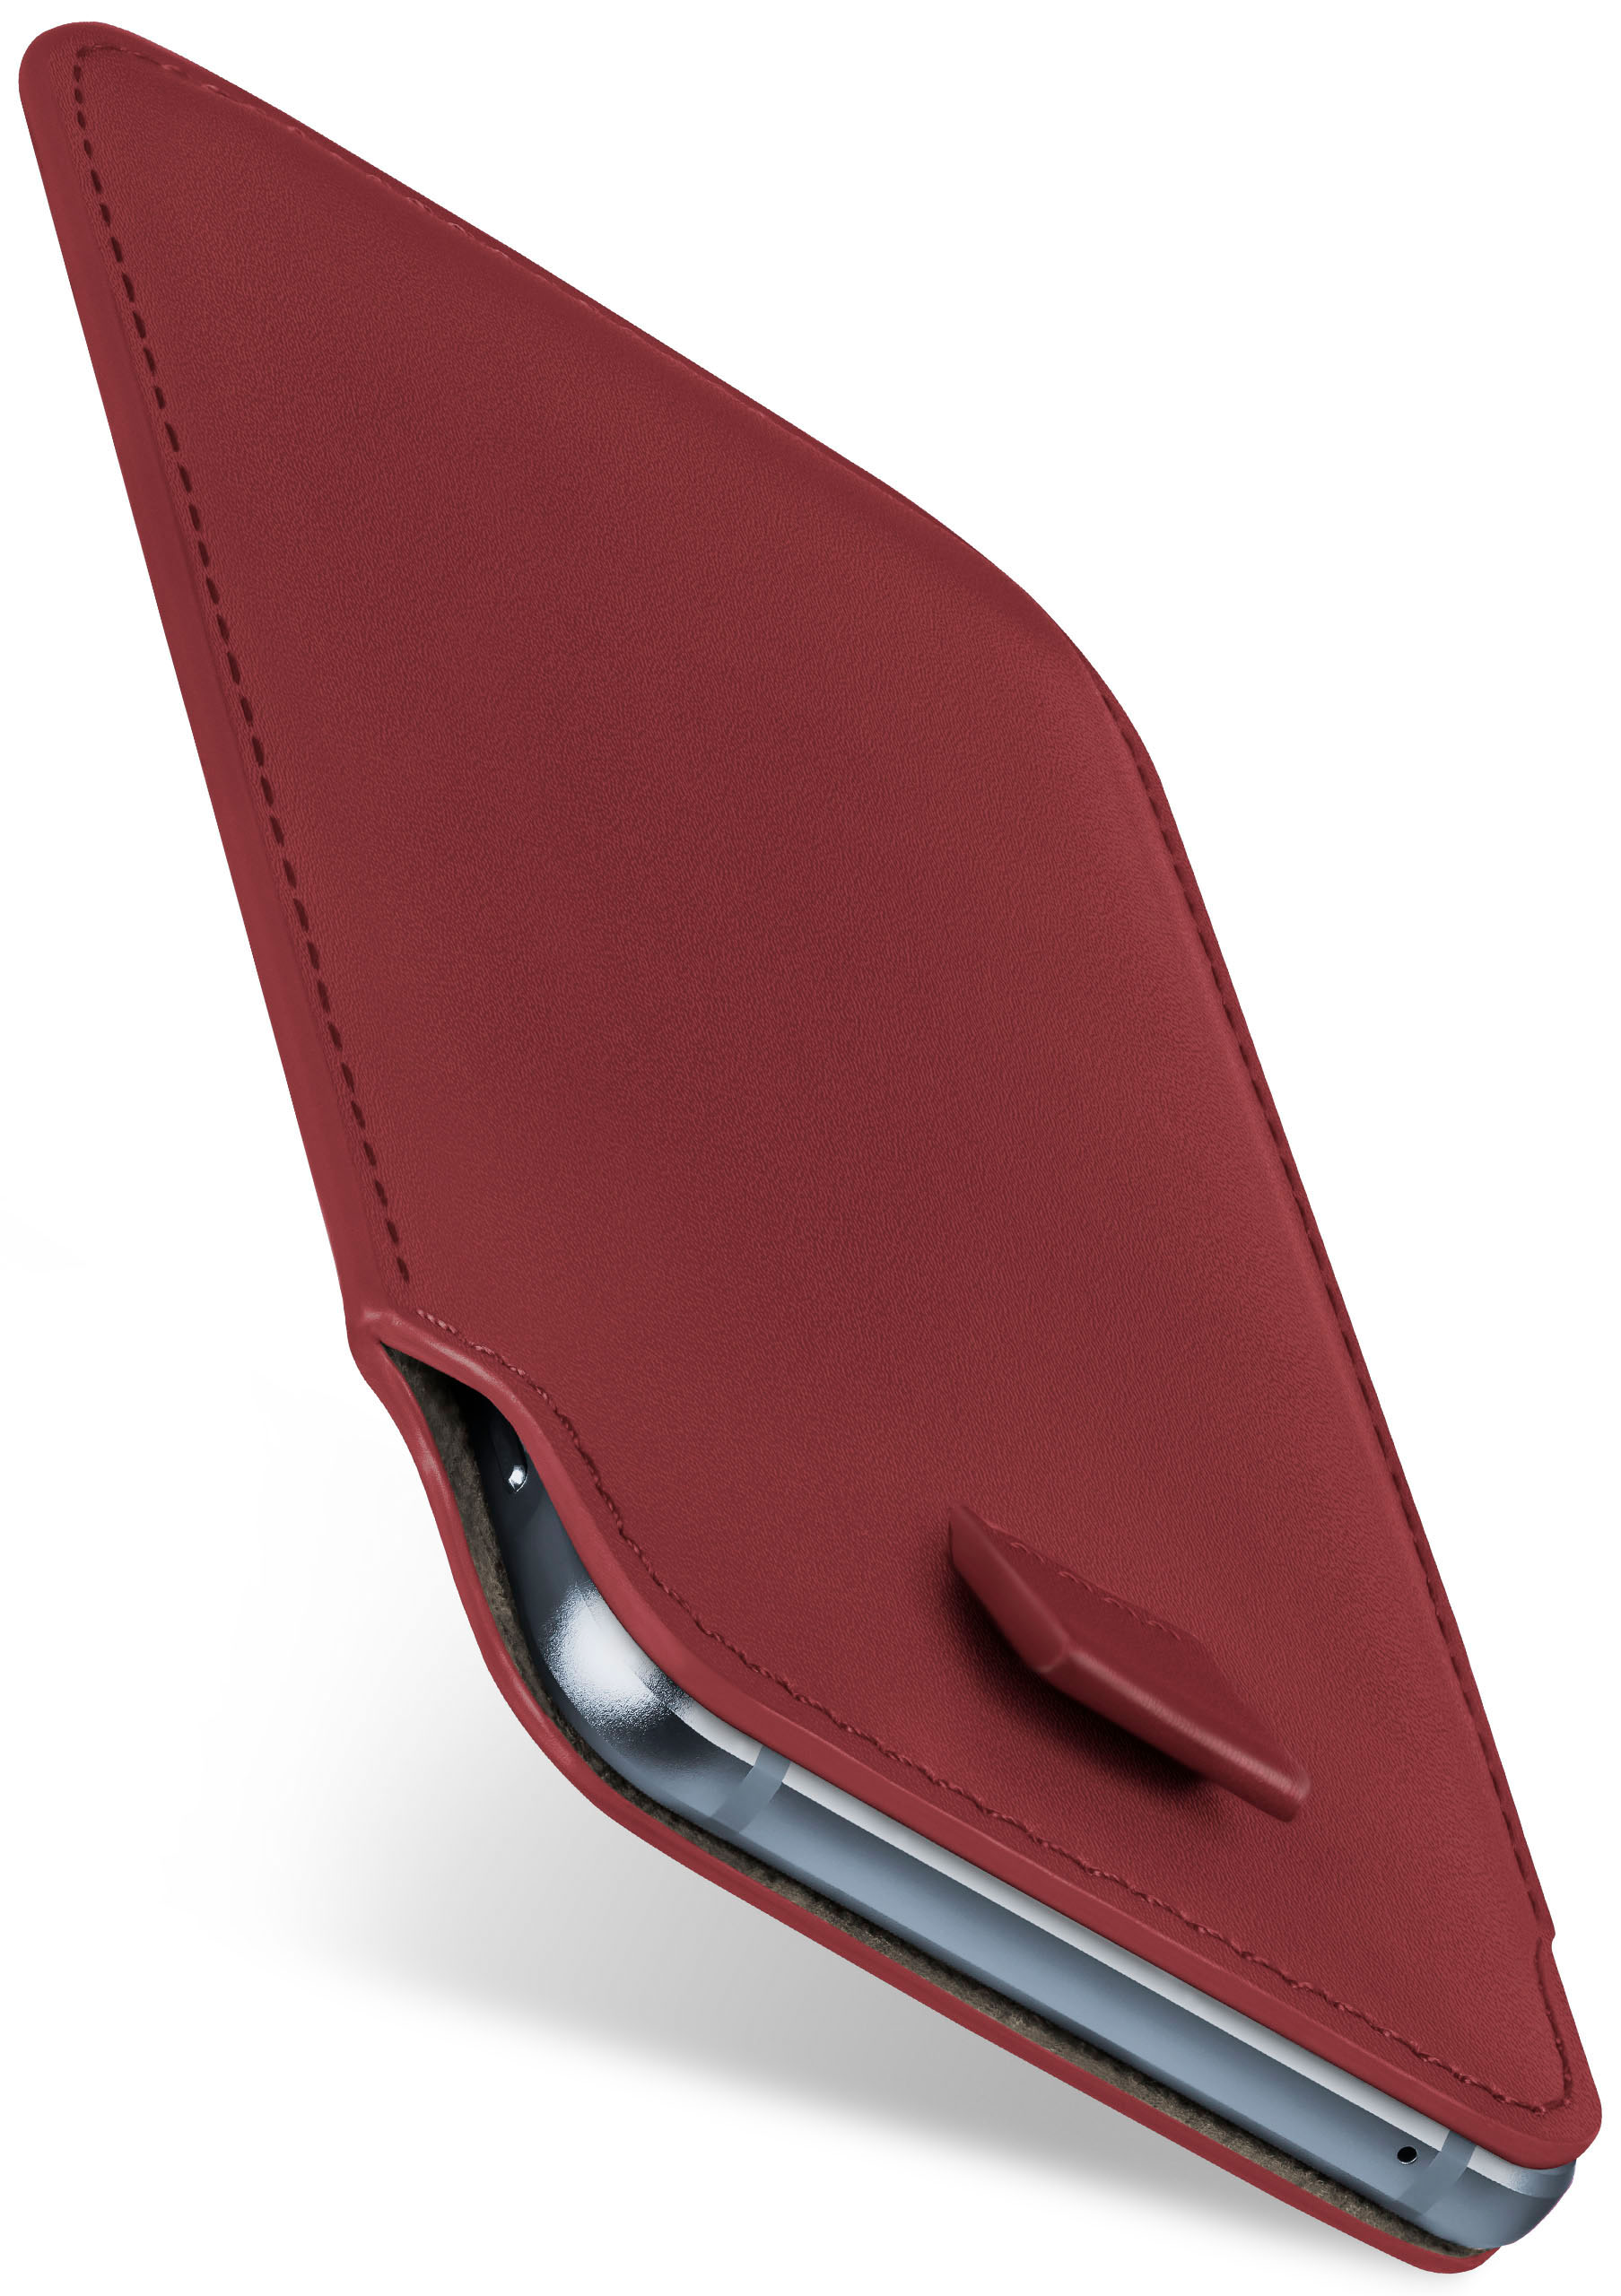 MOEX Slide Case, Full HTC, M7, One Maroon-Red Cover